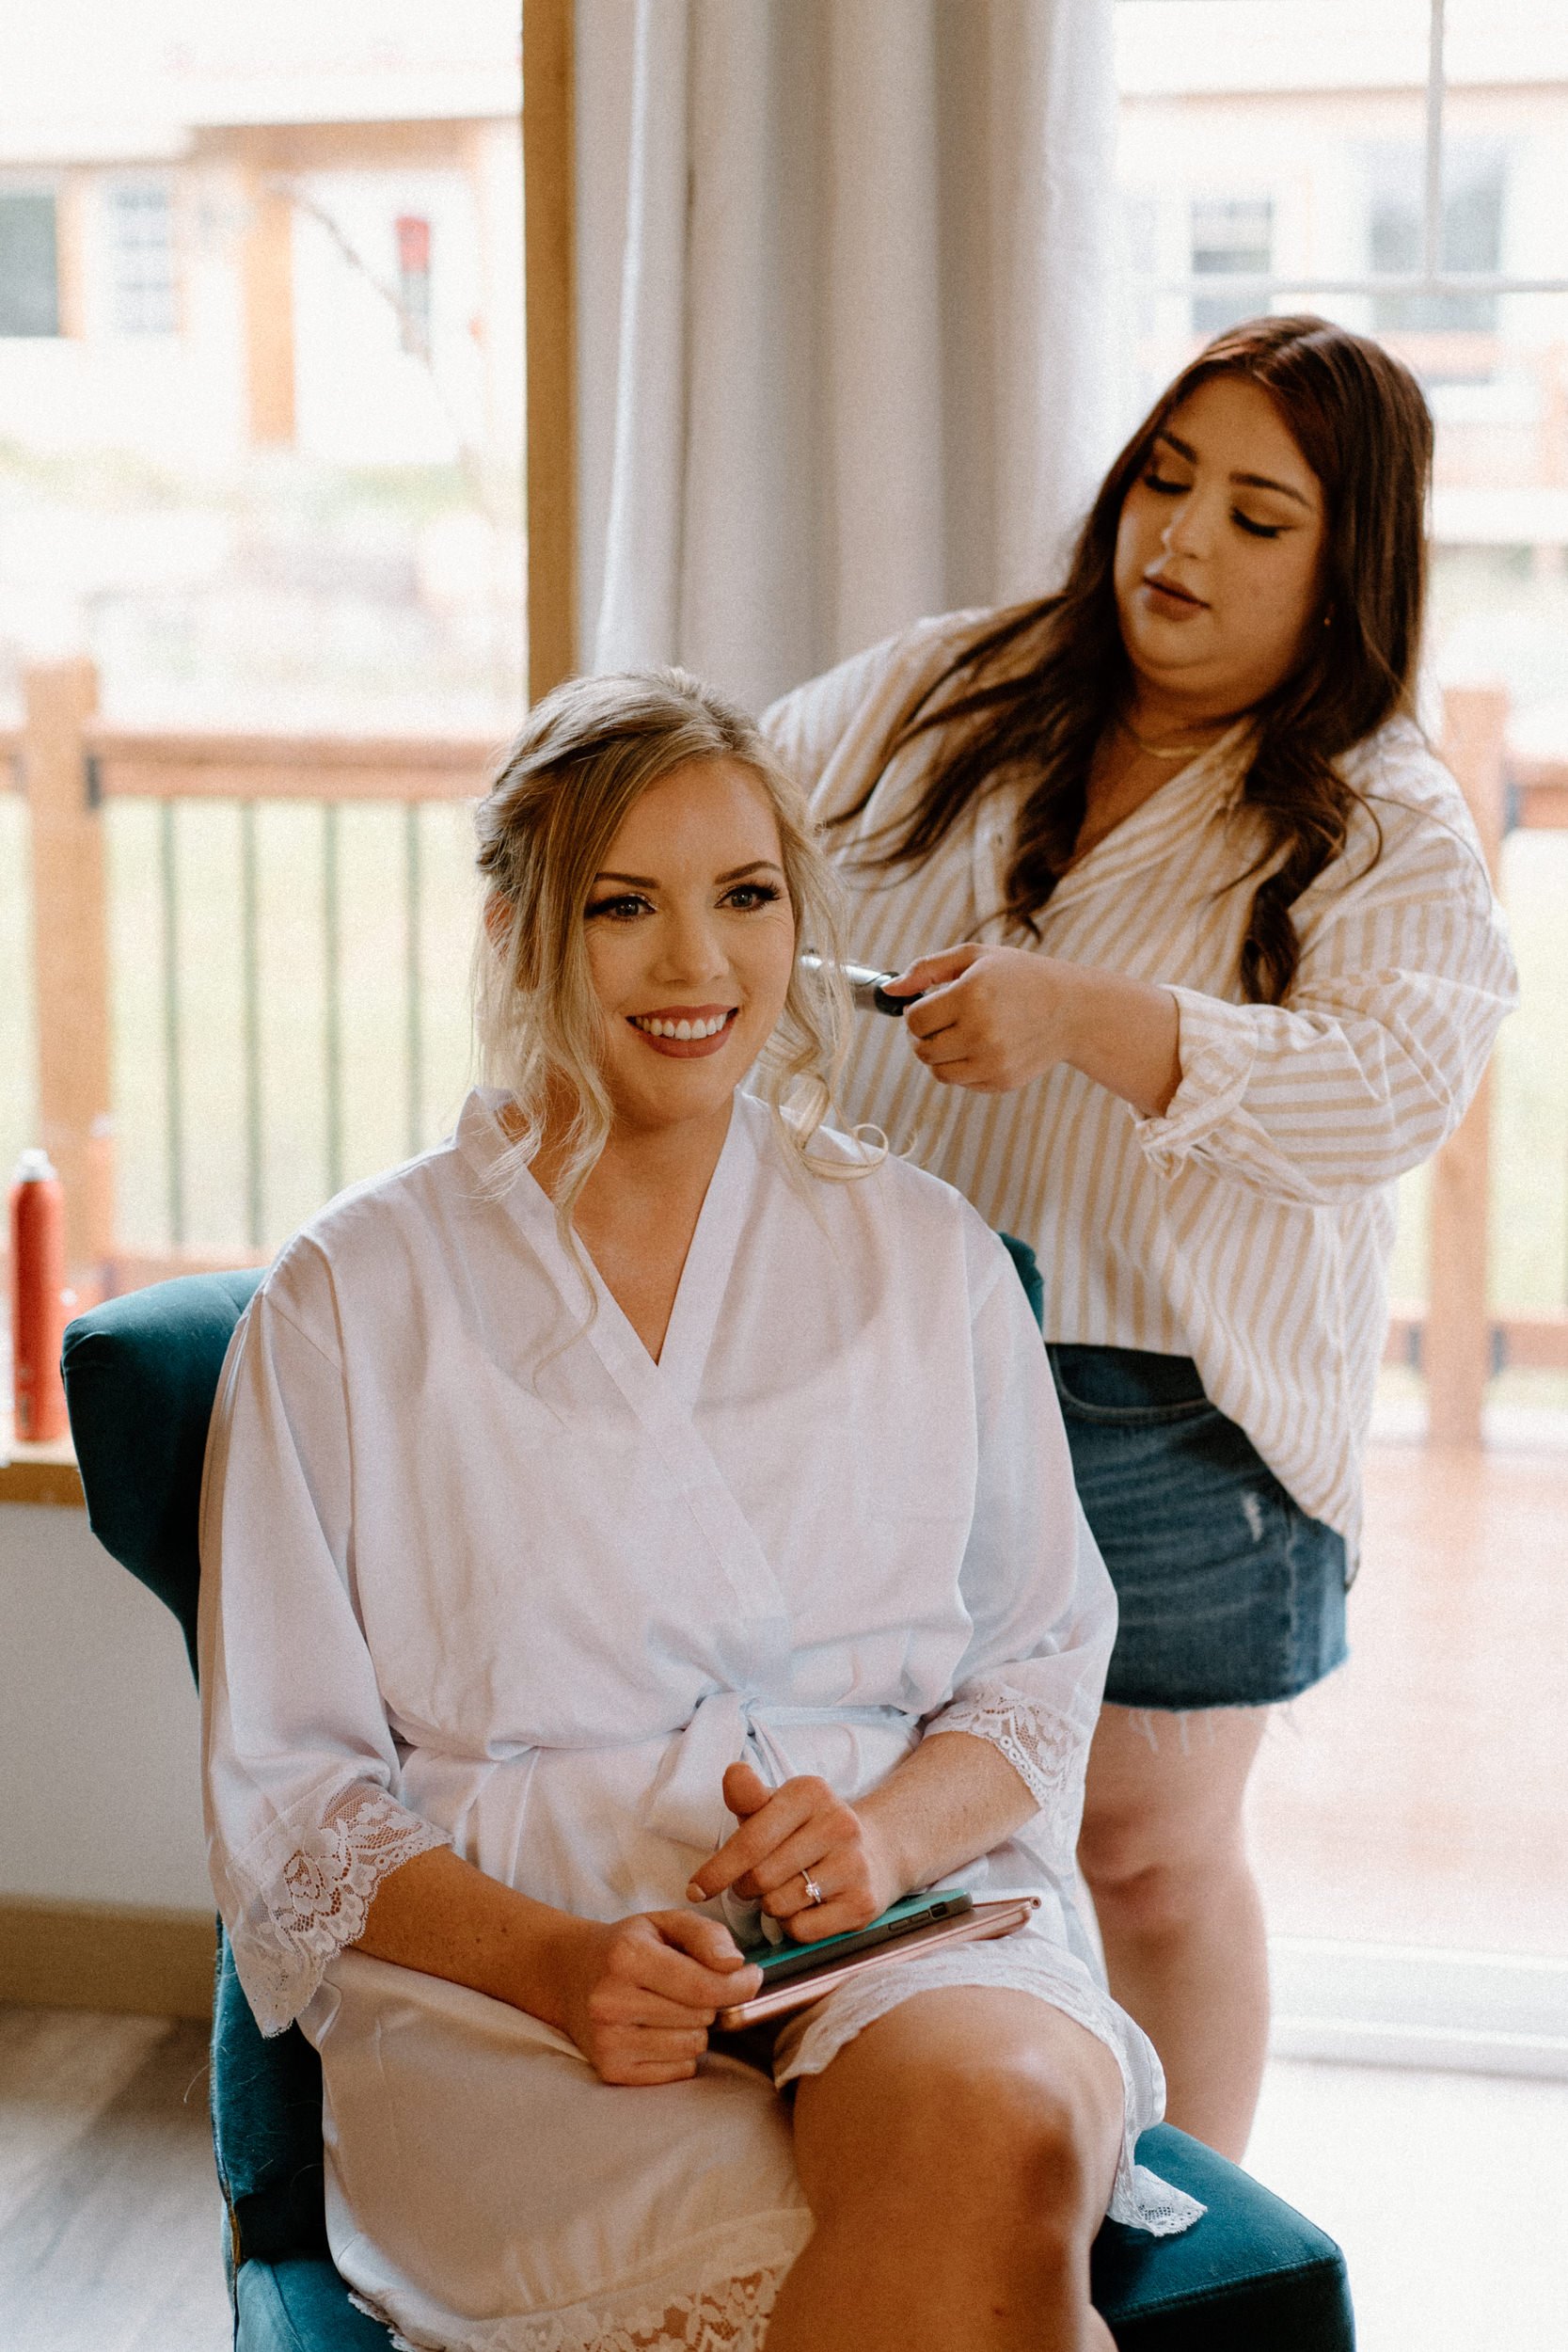 A hairstylist styles the bride's hair